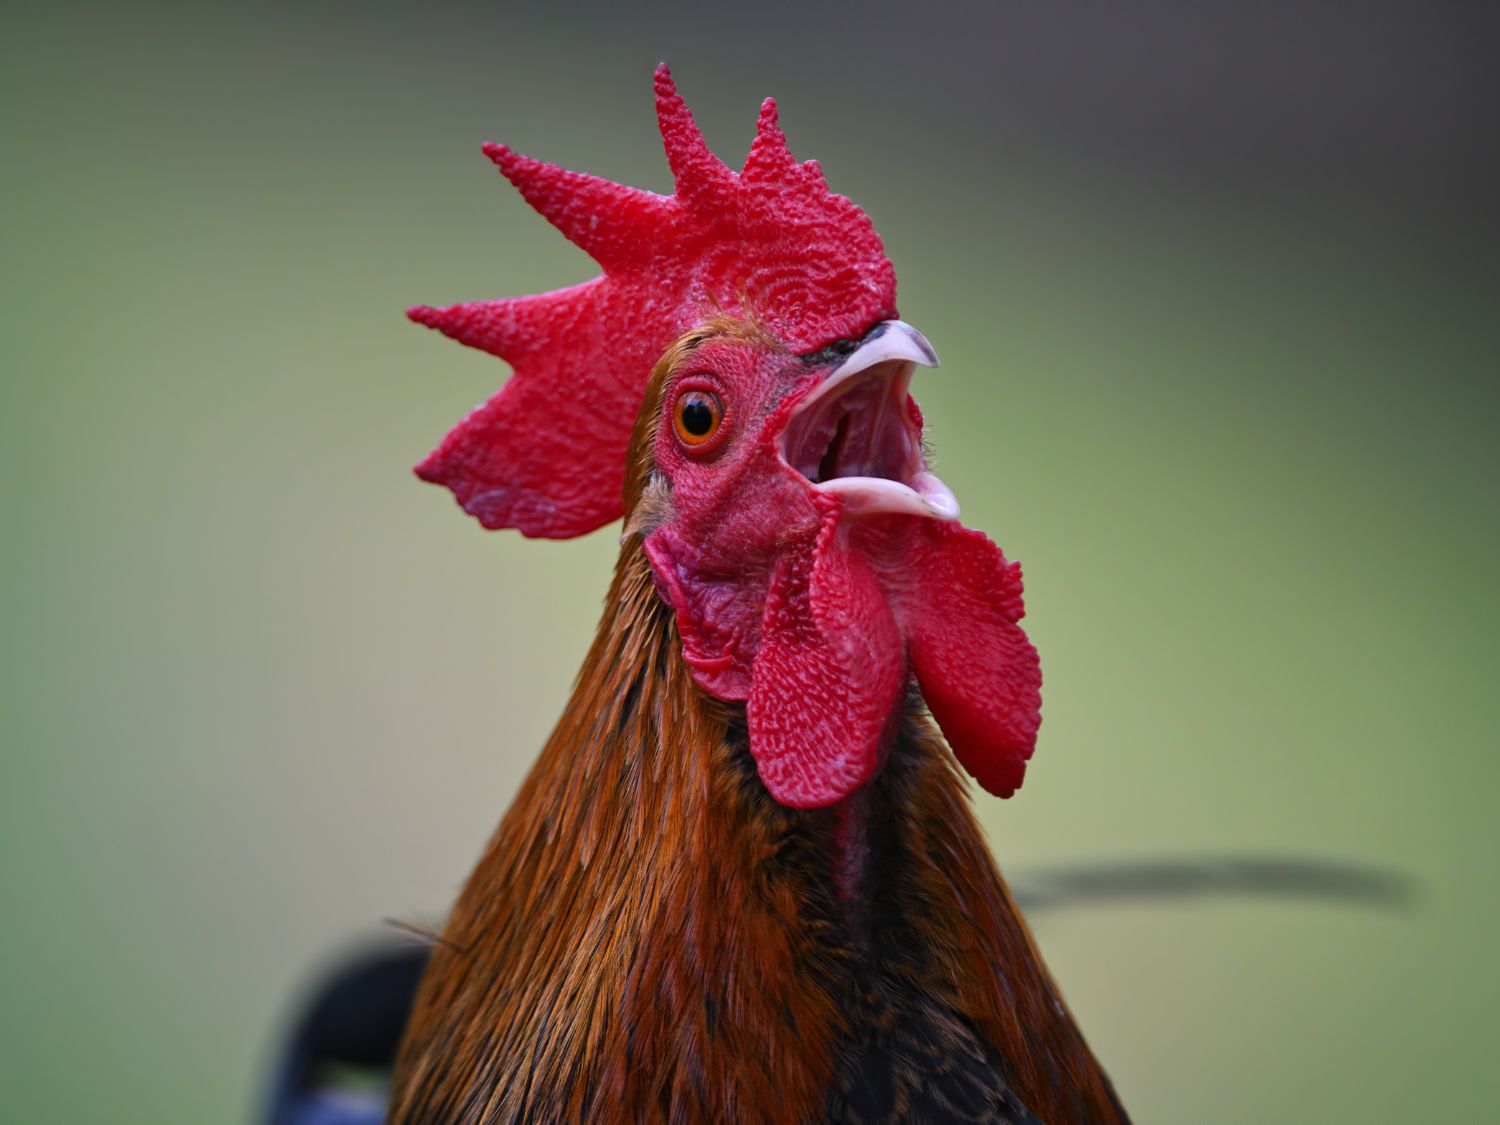 A close up photo of a rooster crowing with a green background